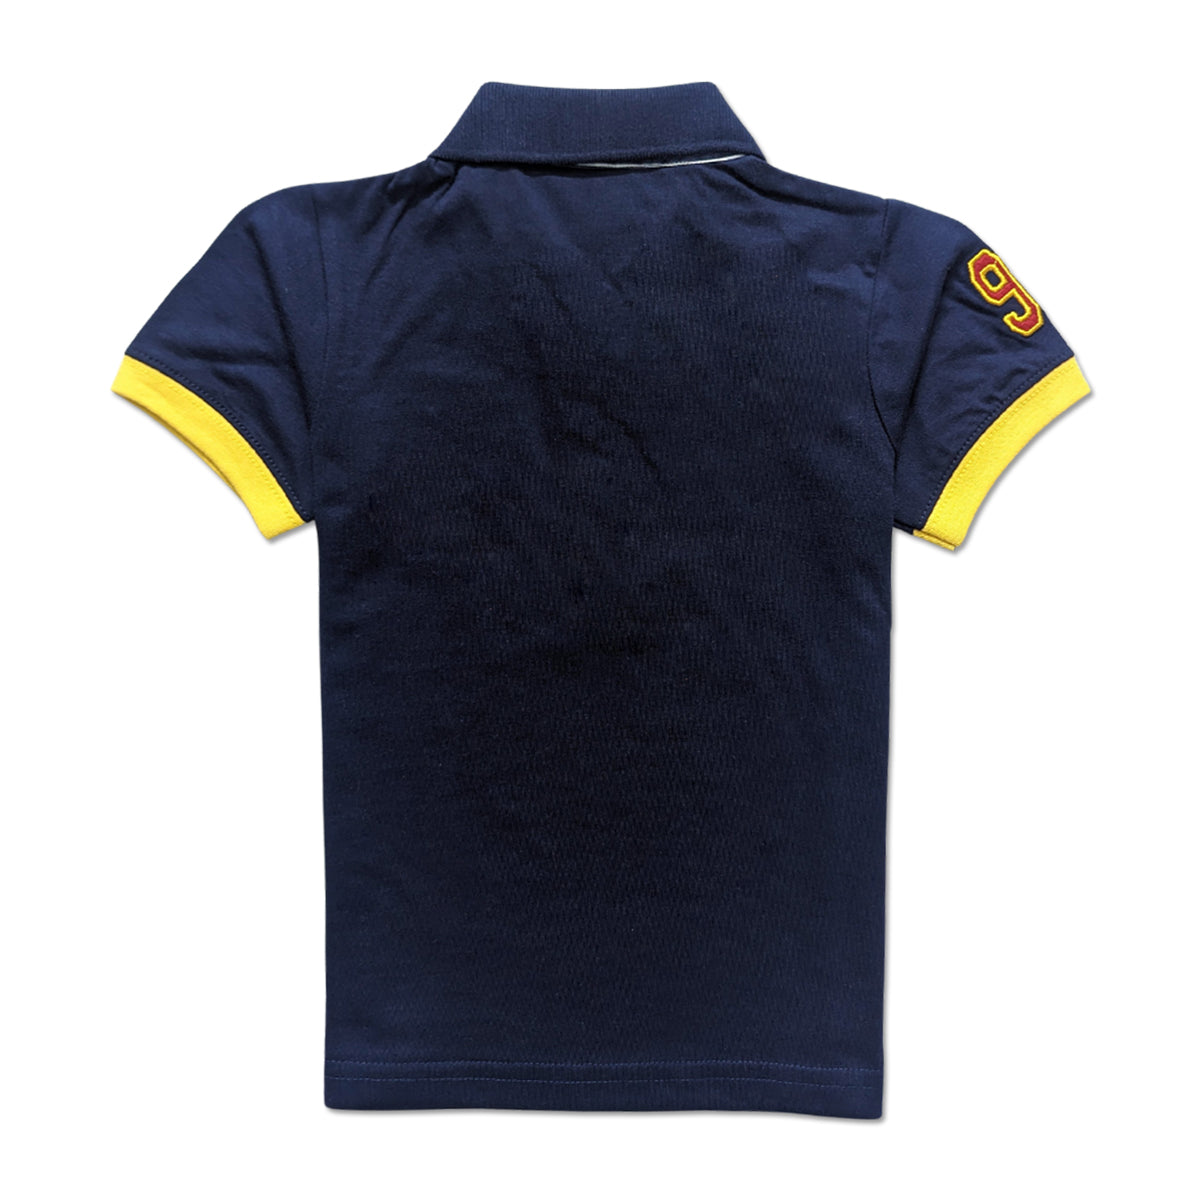 Brand Expo Premium Quality Branded Half Sleeves Polo for Boy's